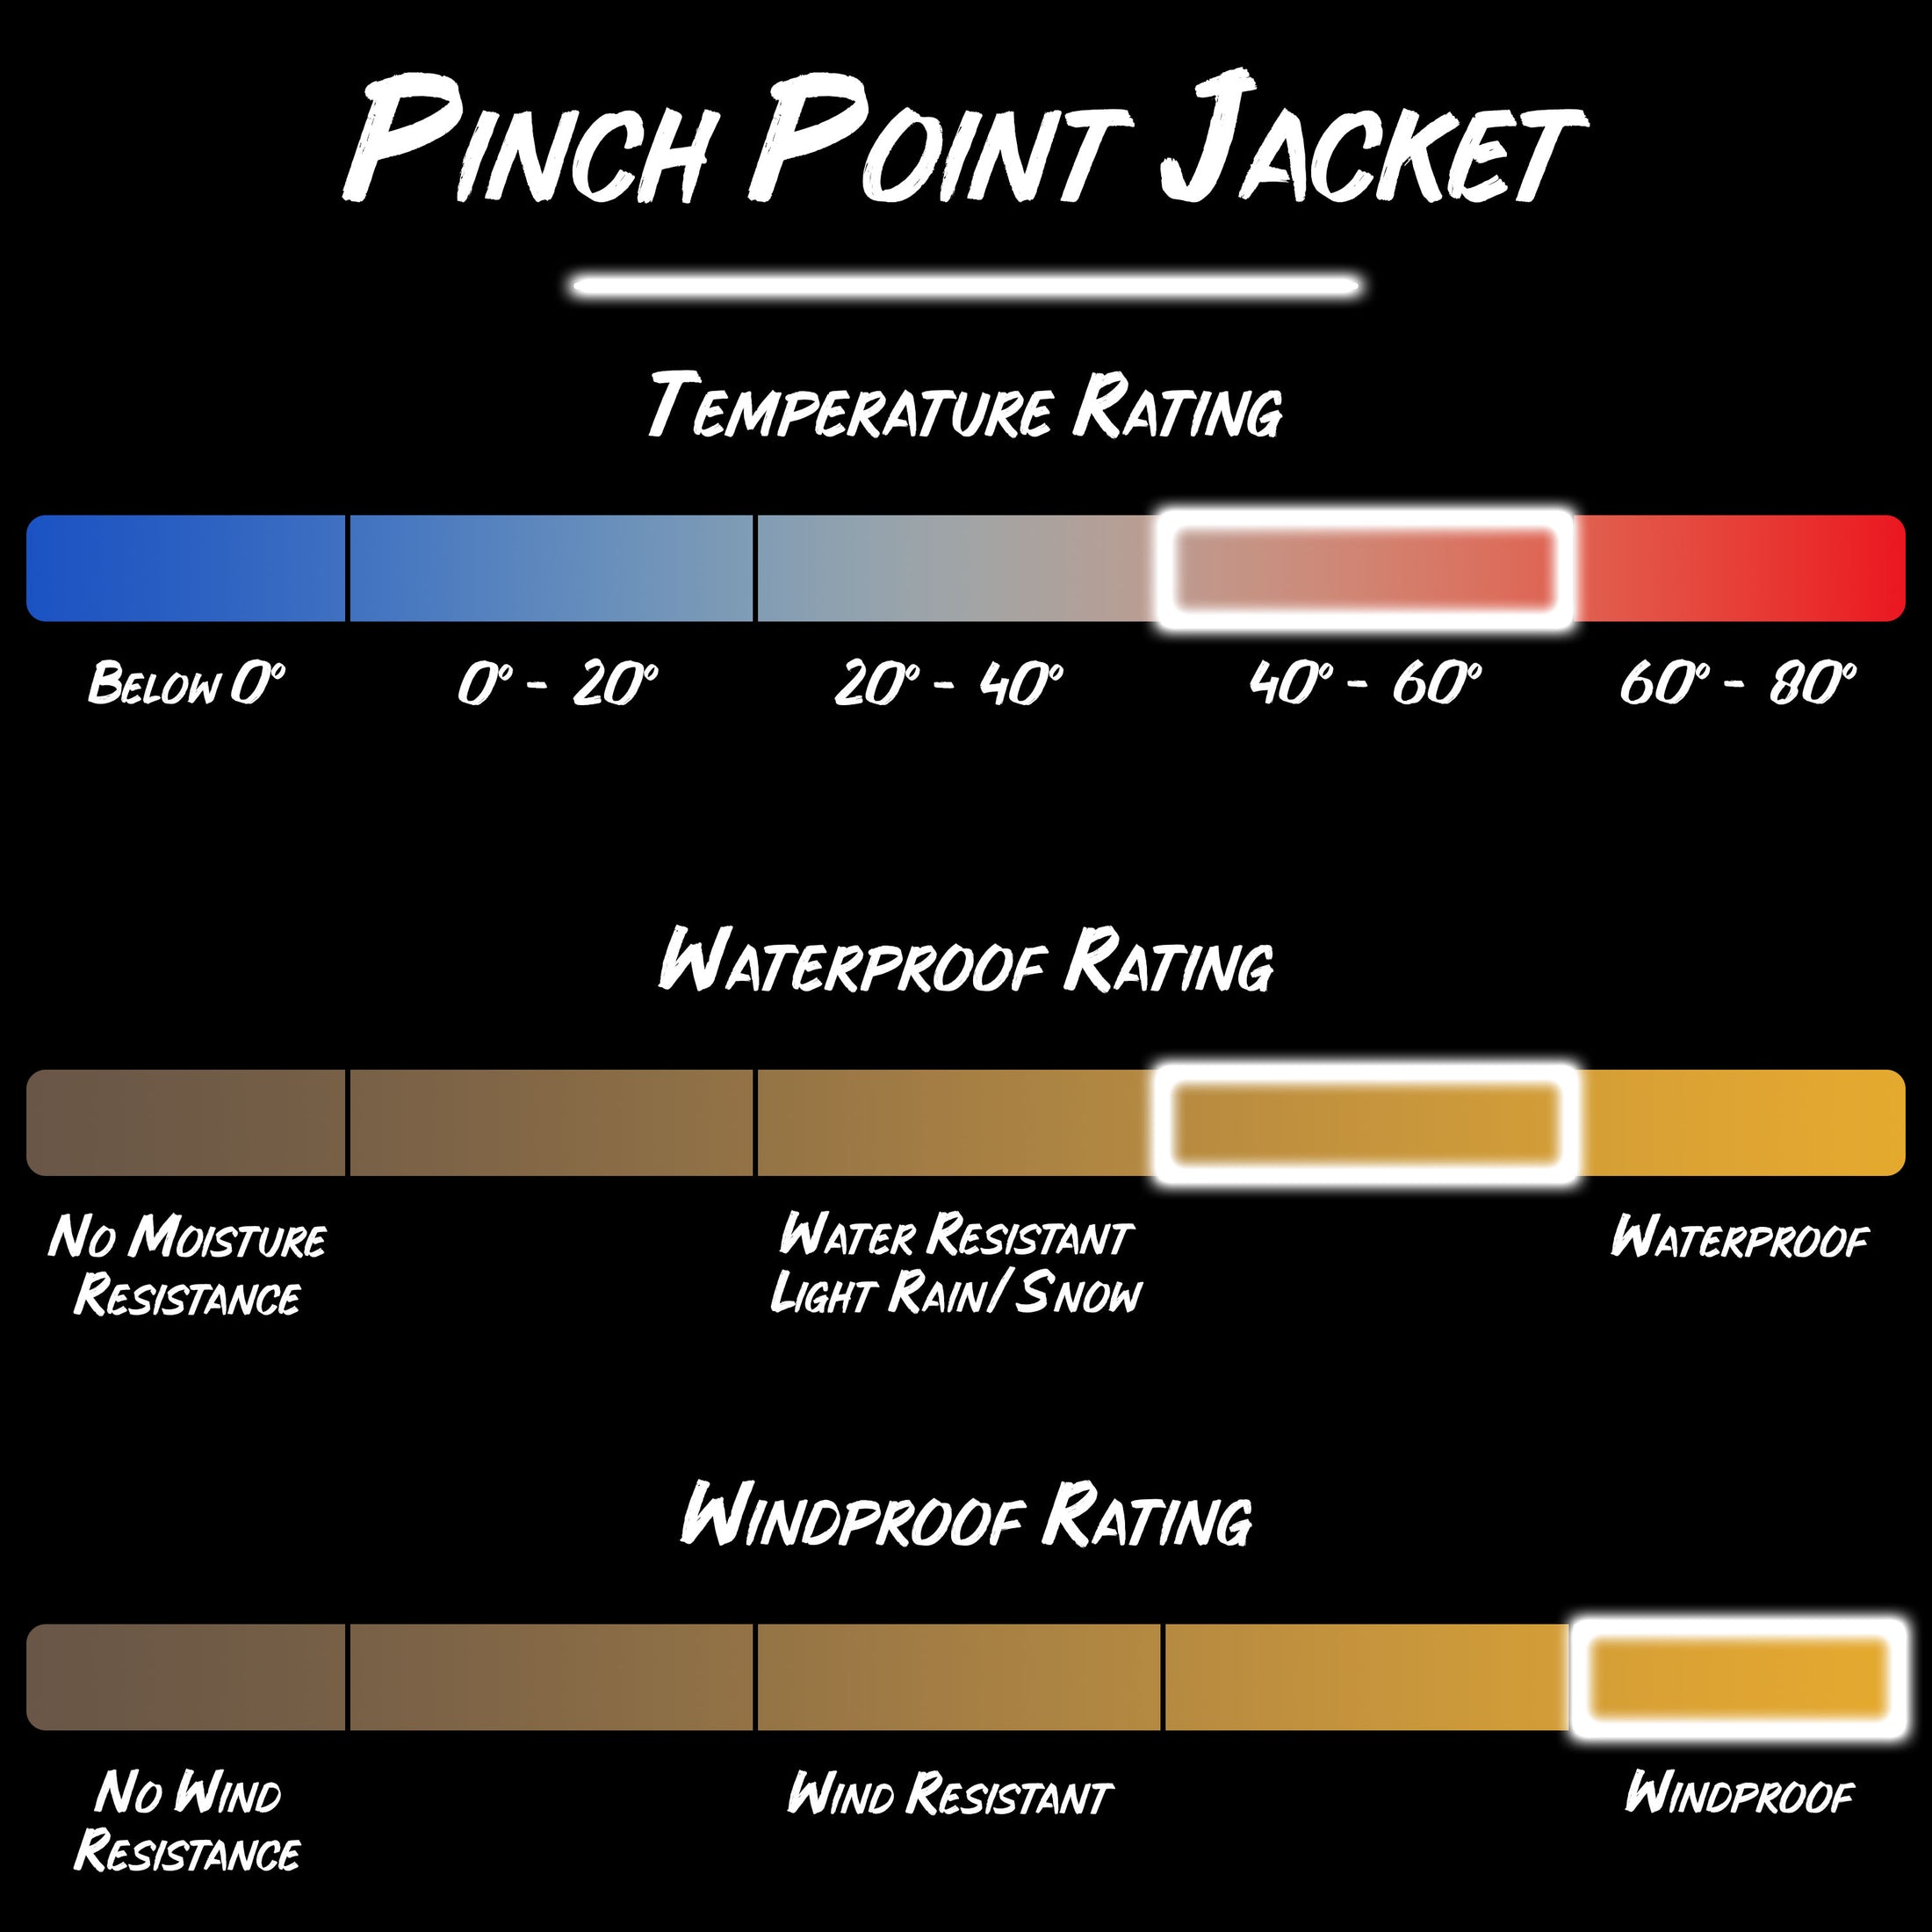 Gamehide pinch point jacket product specifications